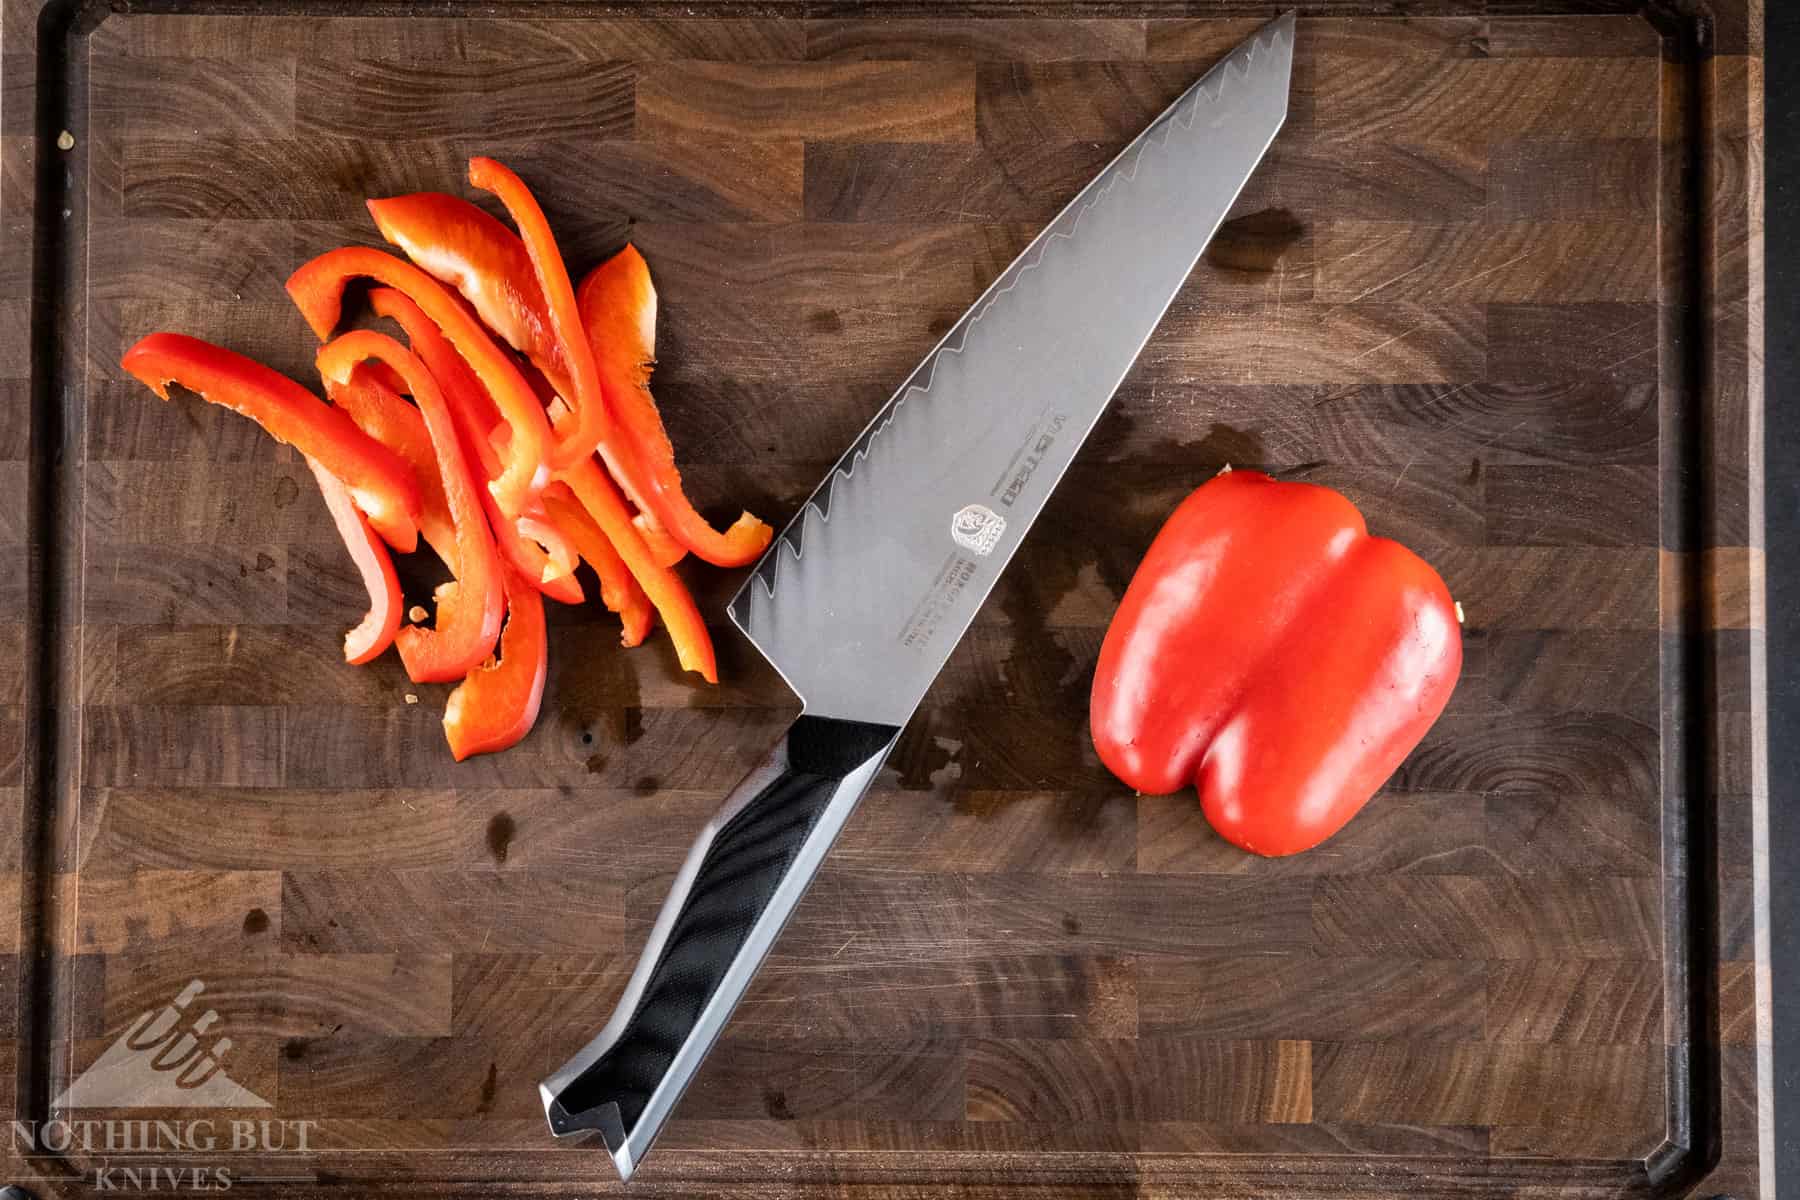 https://www.nothingbutknives.com/wp-content/uploads/2022/05/Vosteed-Morgan-8-Inch-Chef-Knife.jpg